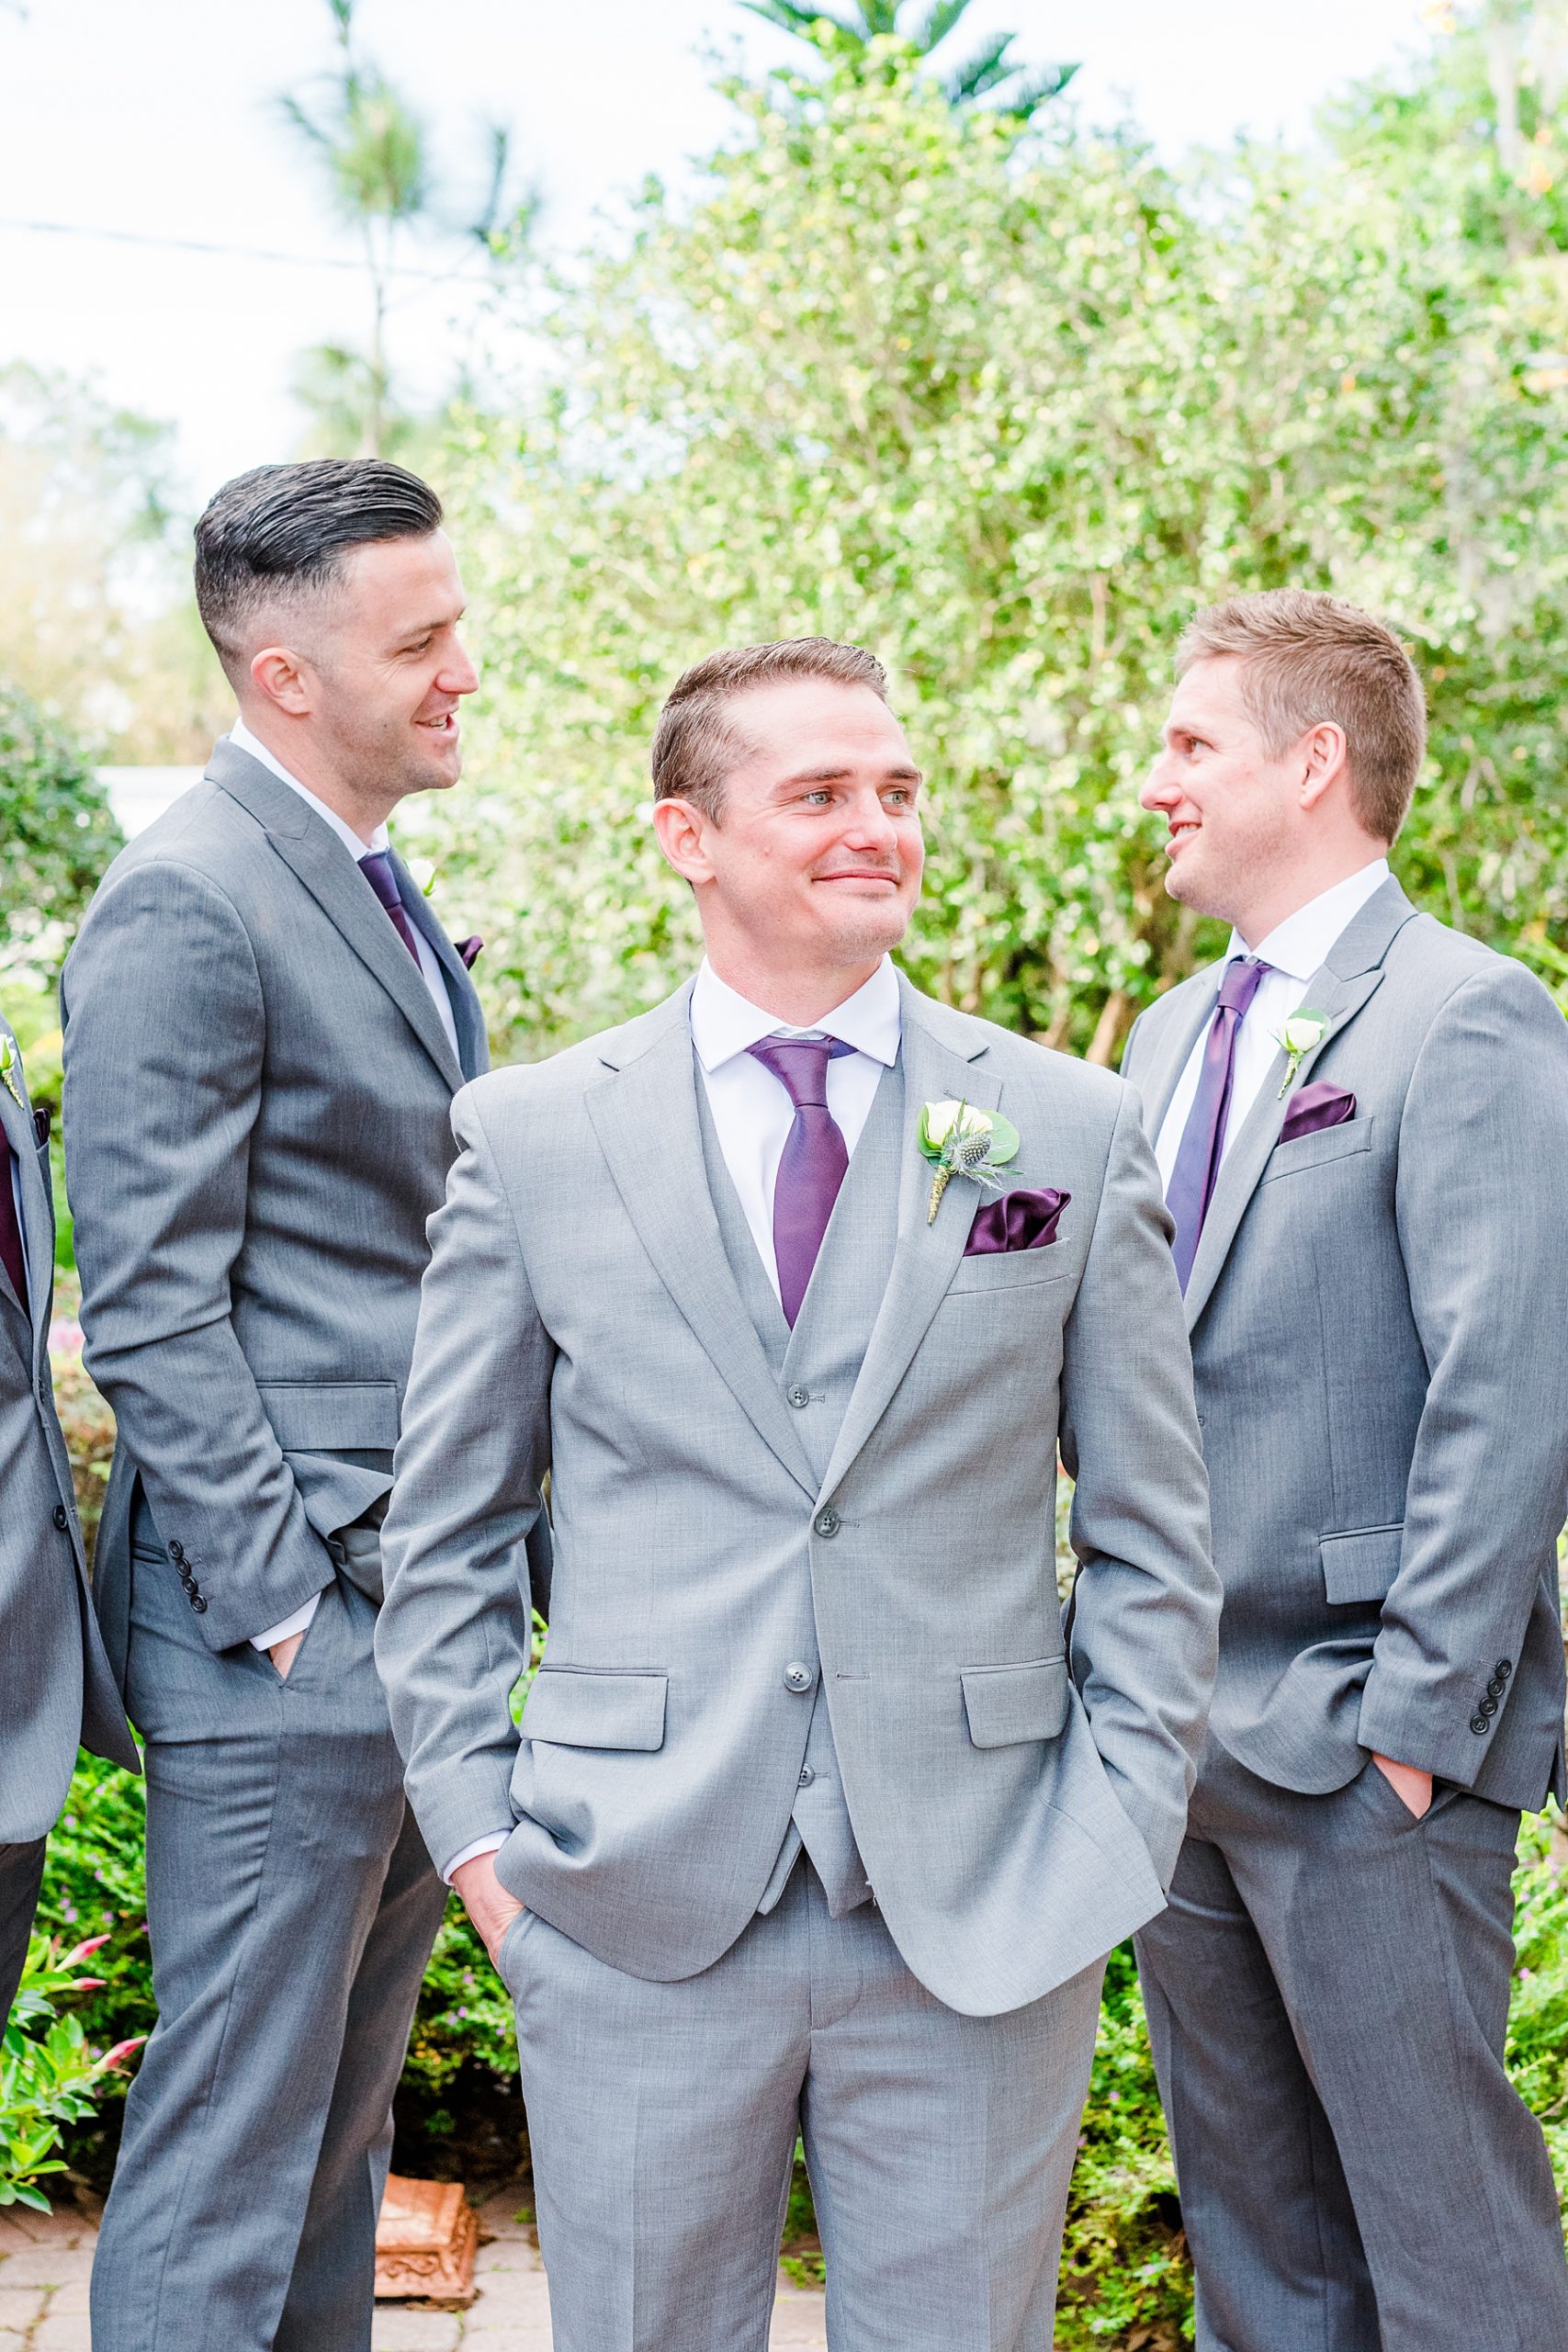 Groom in Tux | Town Manor | Chynna Pacheco Photography